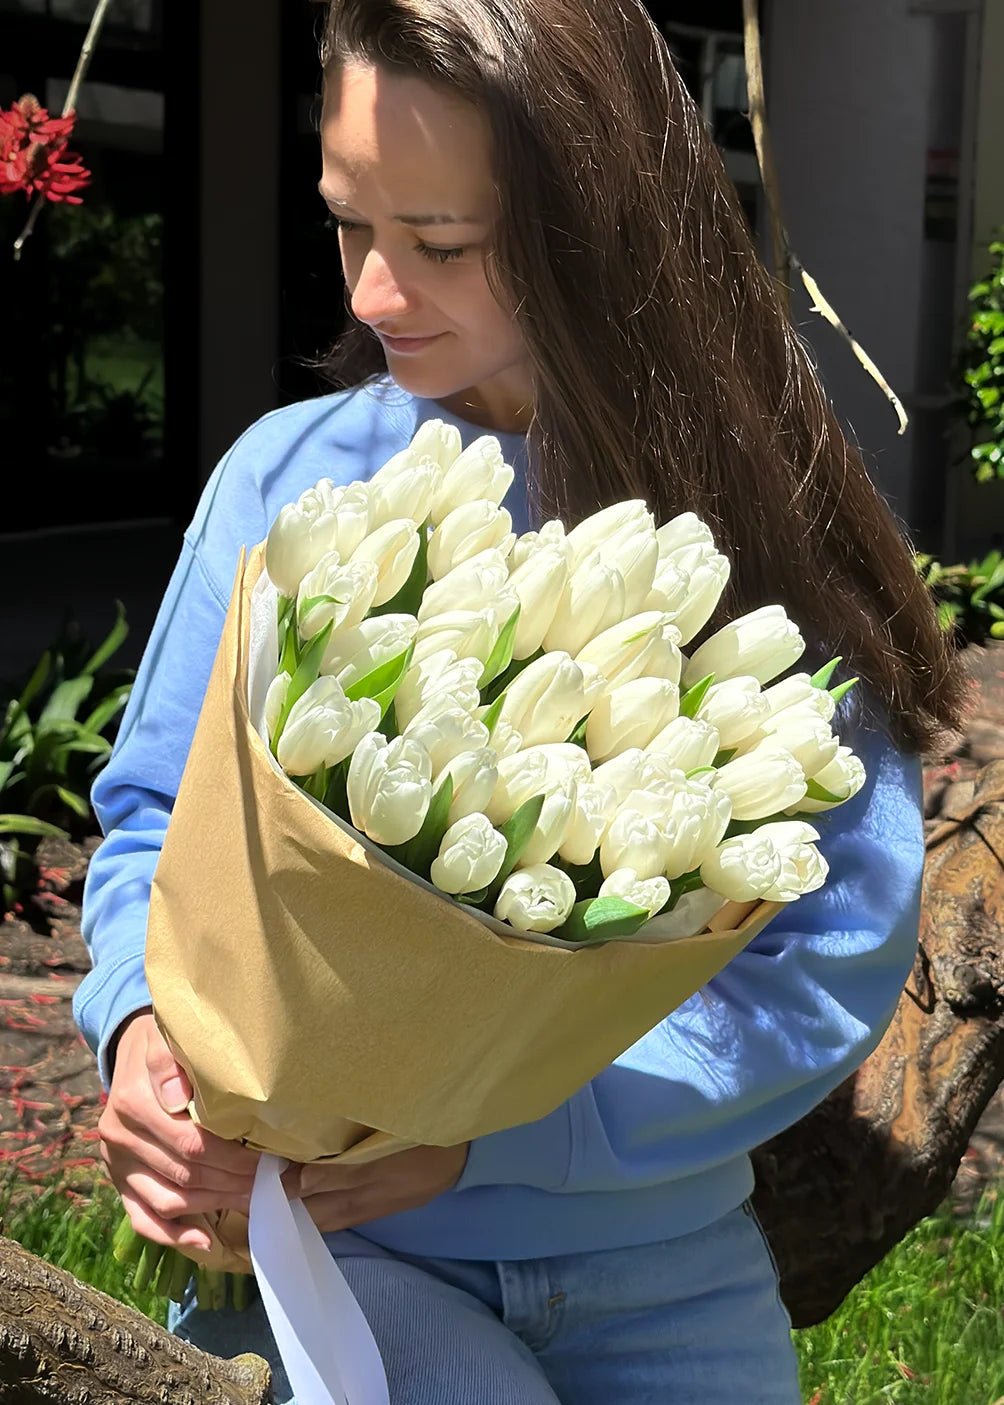 NO. 40. Bouquet of White Tulips